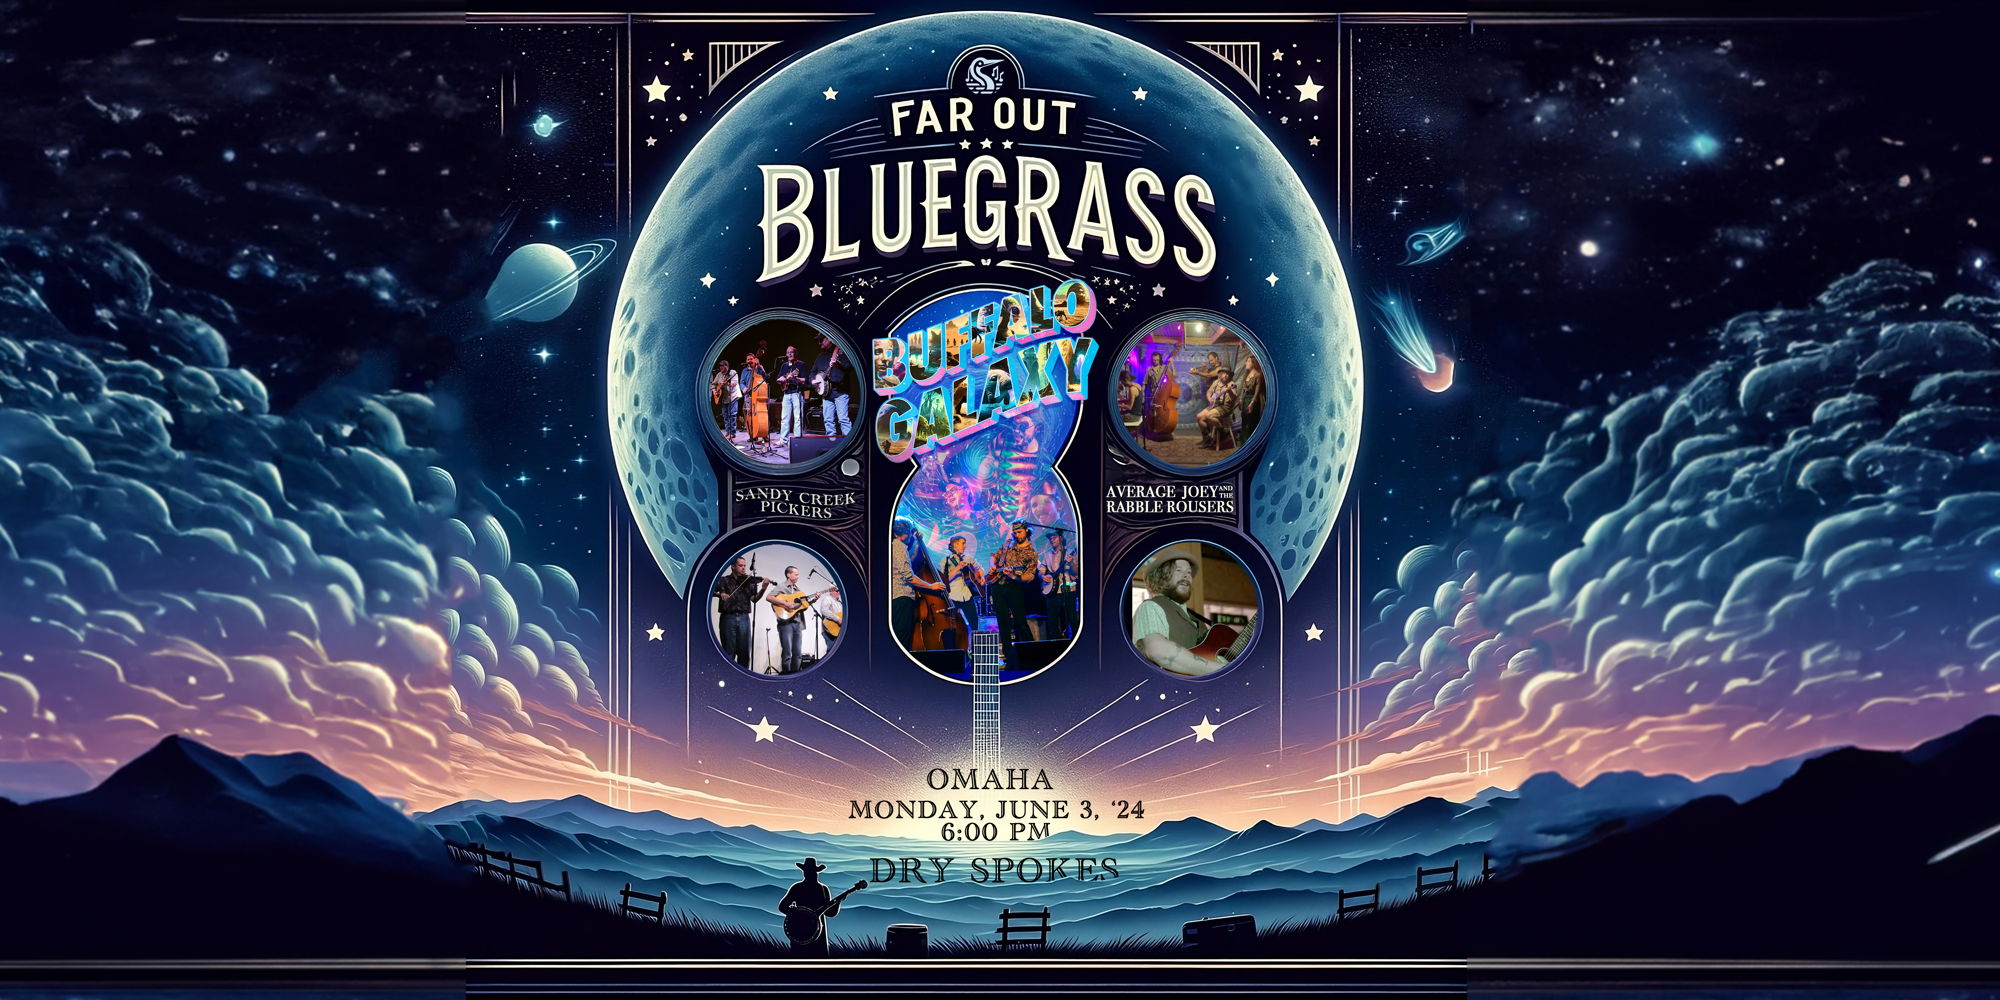 Far Out Bluegrass Showcase: Sandy Creek Pickers, Buffalo Galaxy, Average Joey & The Rabble Rousers promotional image